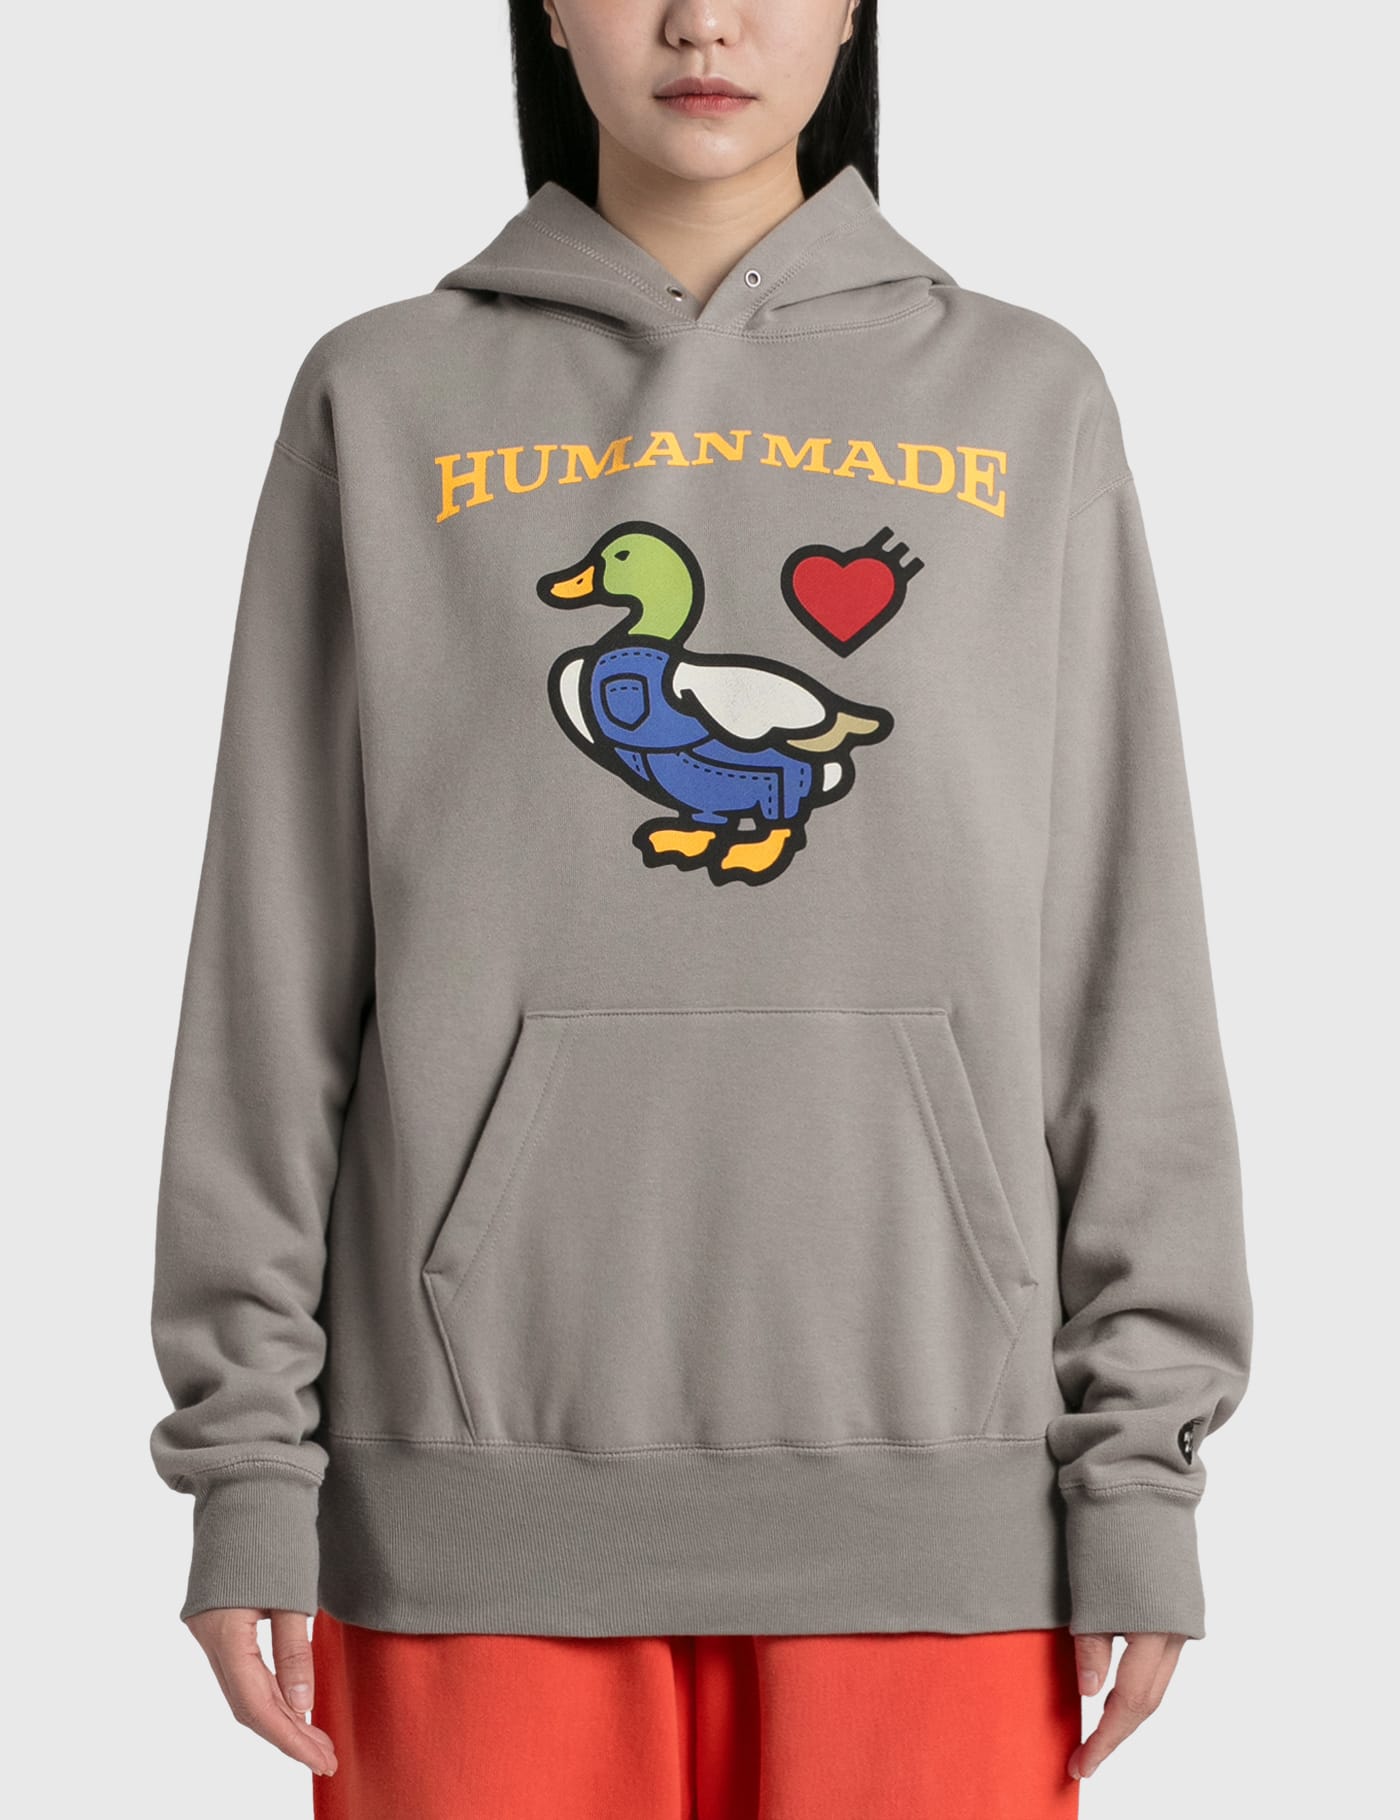 Human Made - Duck Hoodie | HBX - Globally Curated Fashion and ...